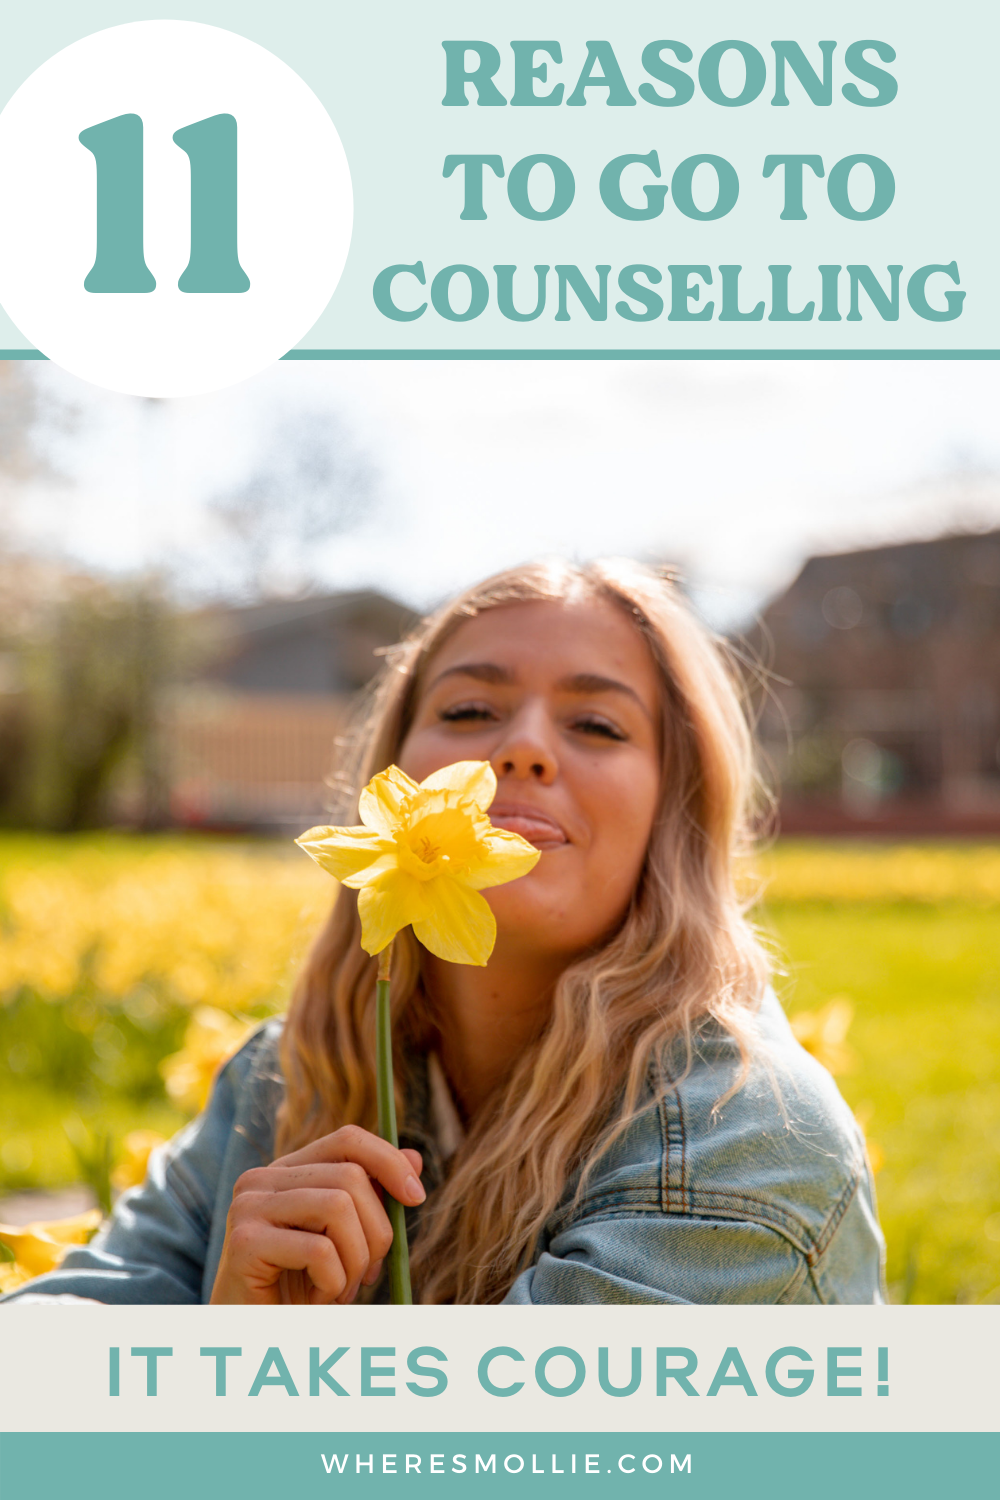 11 benefits of counselling and reasons to be proud of going